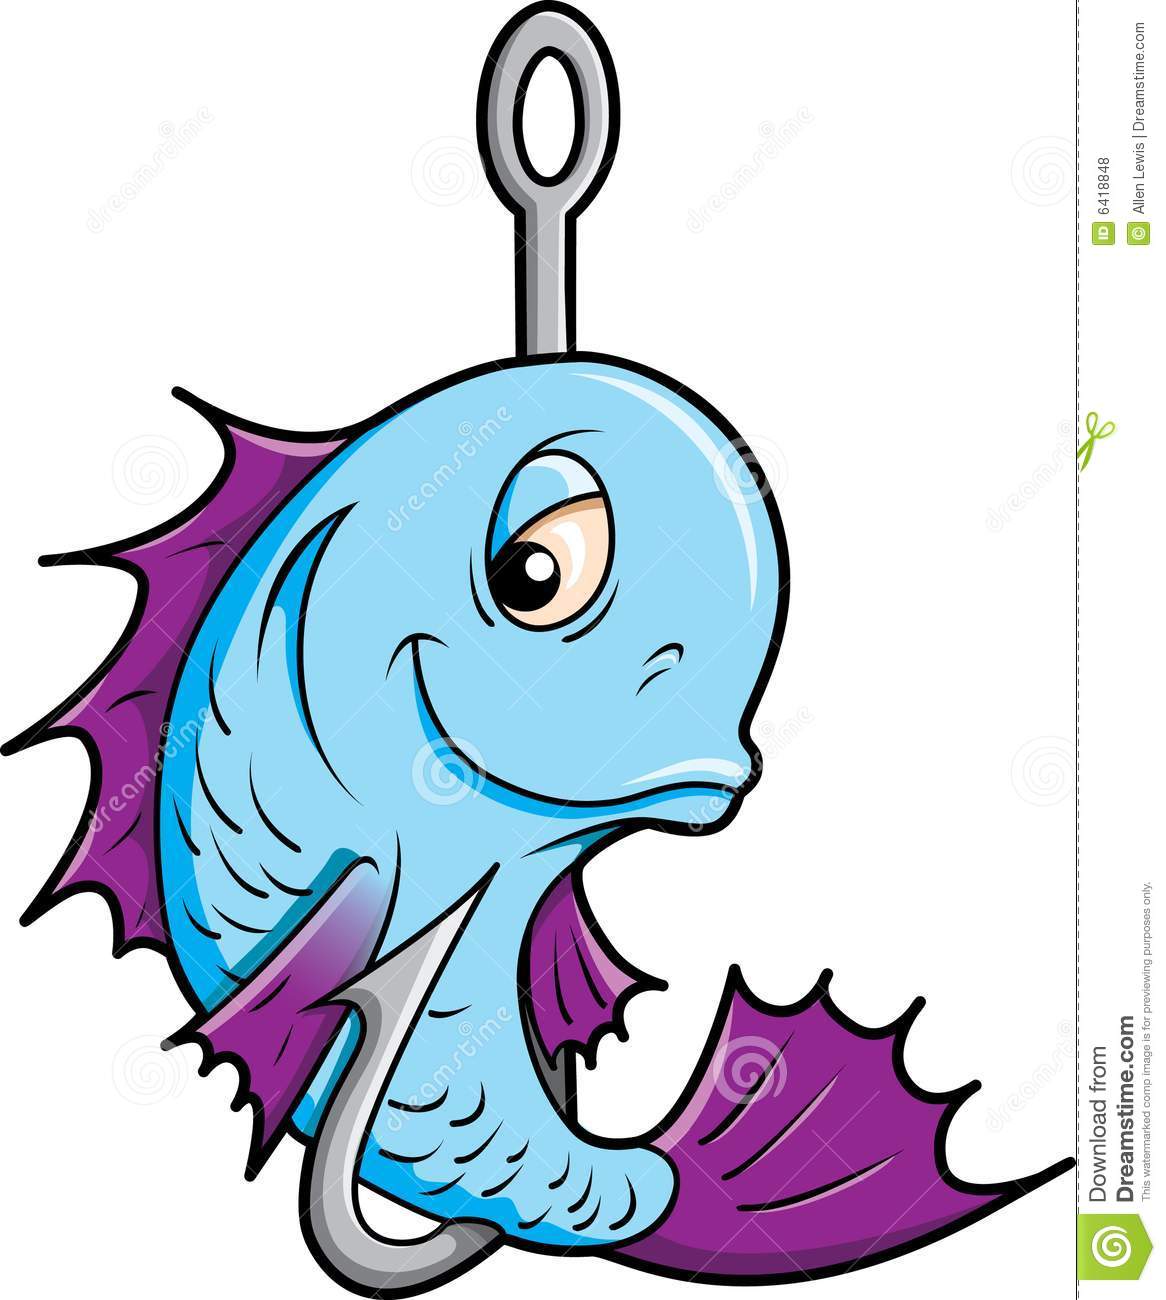 Fish On A Hook  Royalty Free Stock Photos   Image  6418848